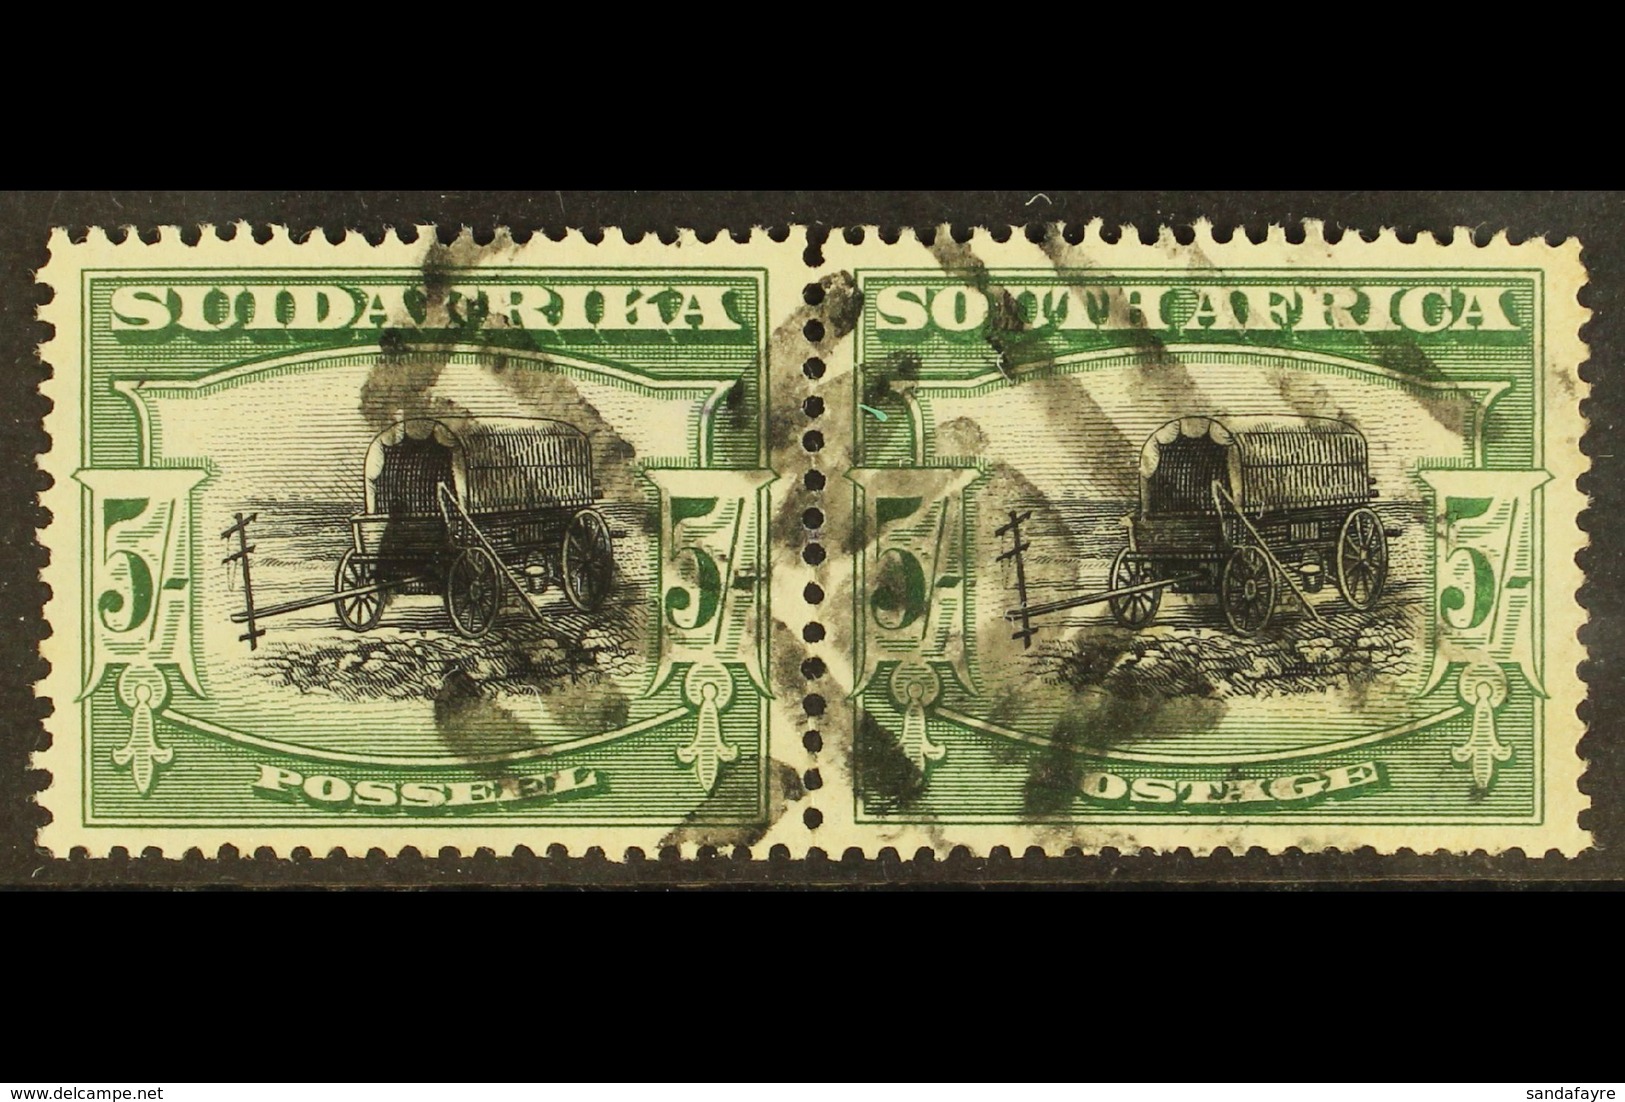 1927-30 5s Black & Green, Group III Perf.14x13½ Up, SG 38a, Used Horizontal Pair Wit "WDK" Parcel Cancel Mark, Cat.£1100 - Ohne Zuordnung